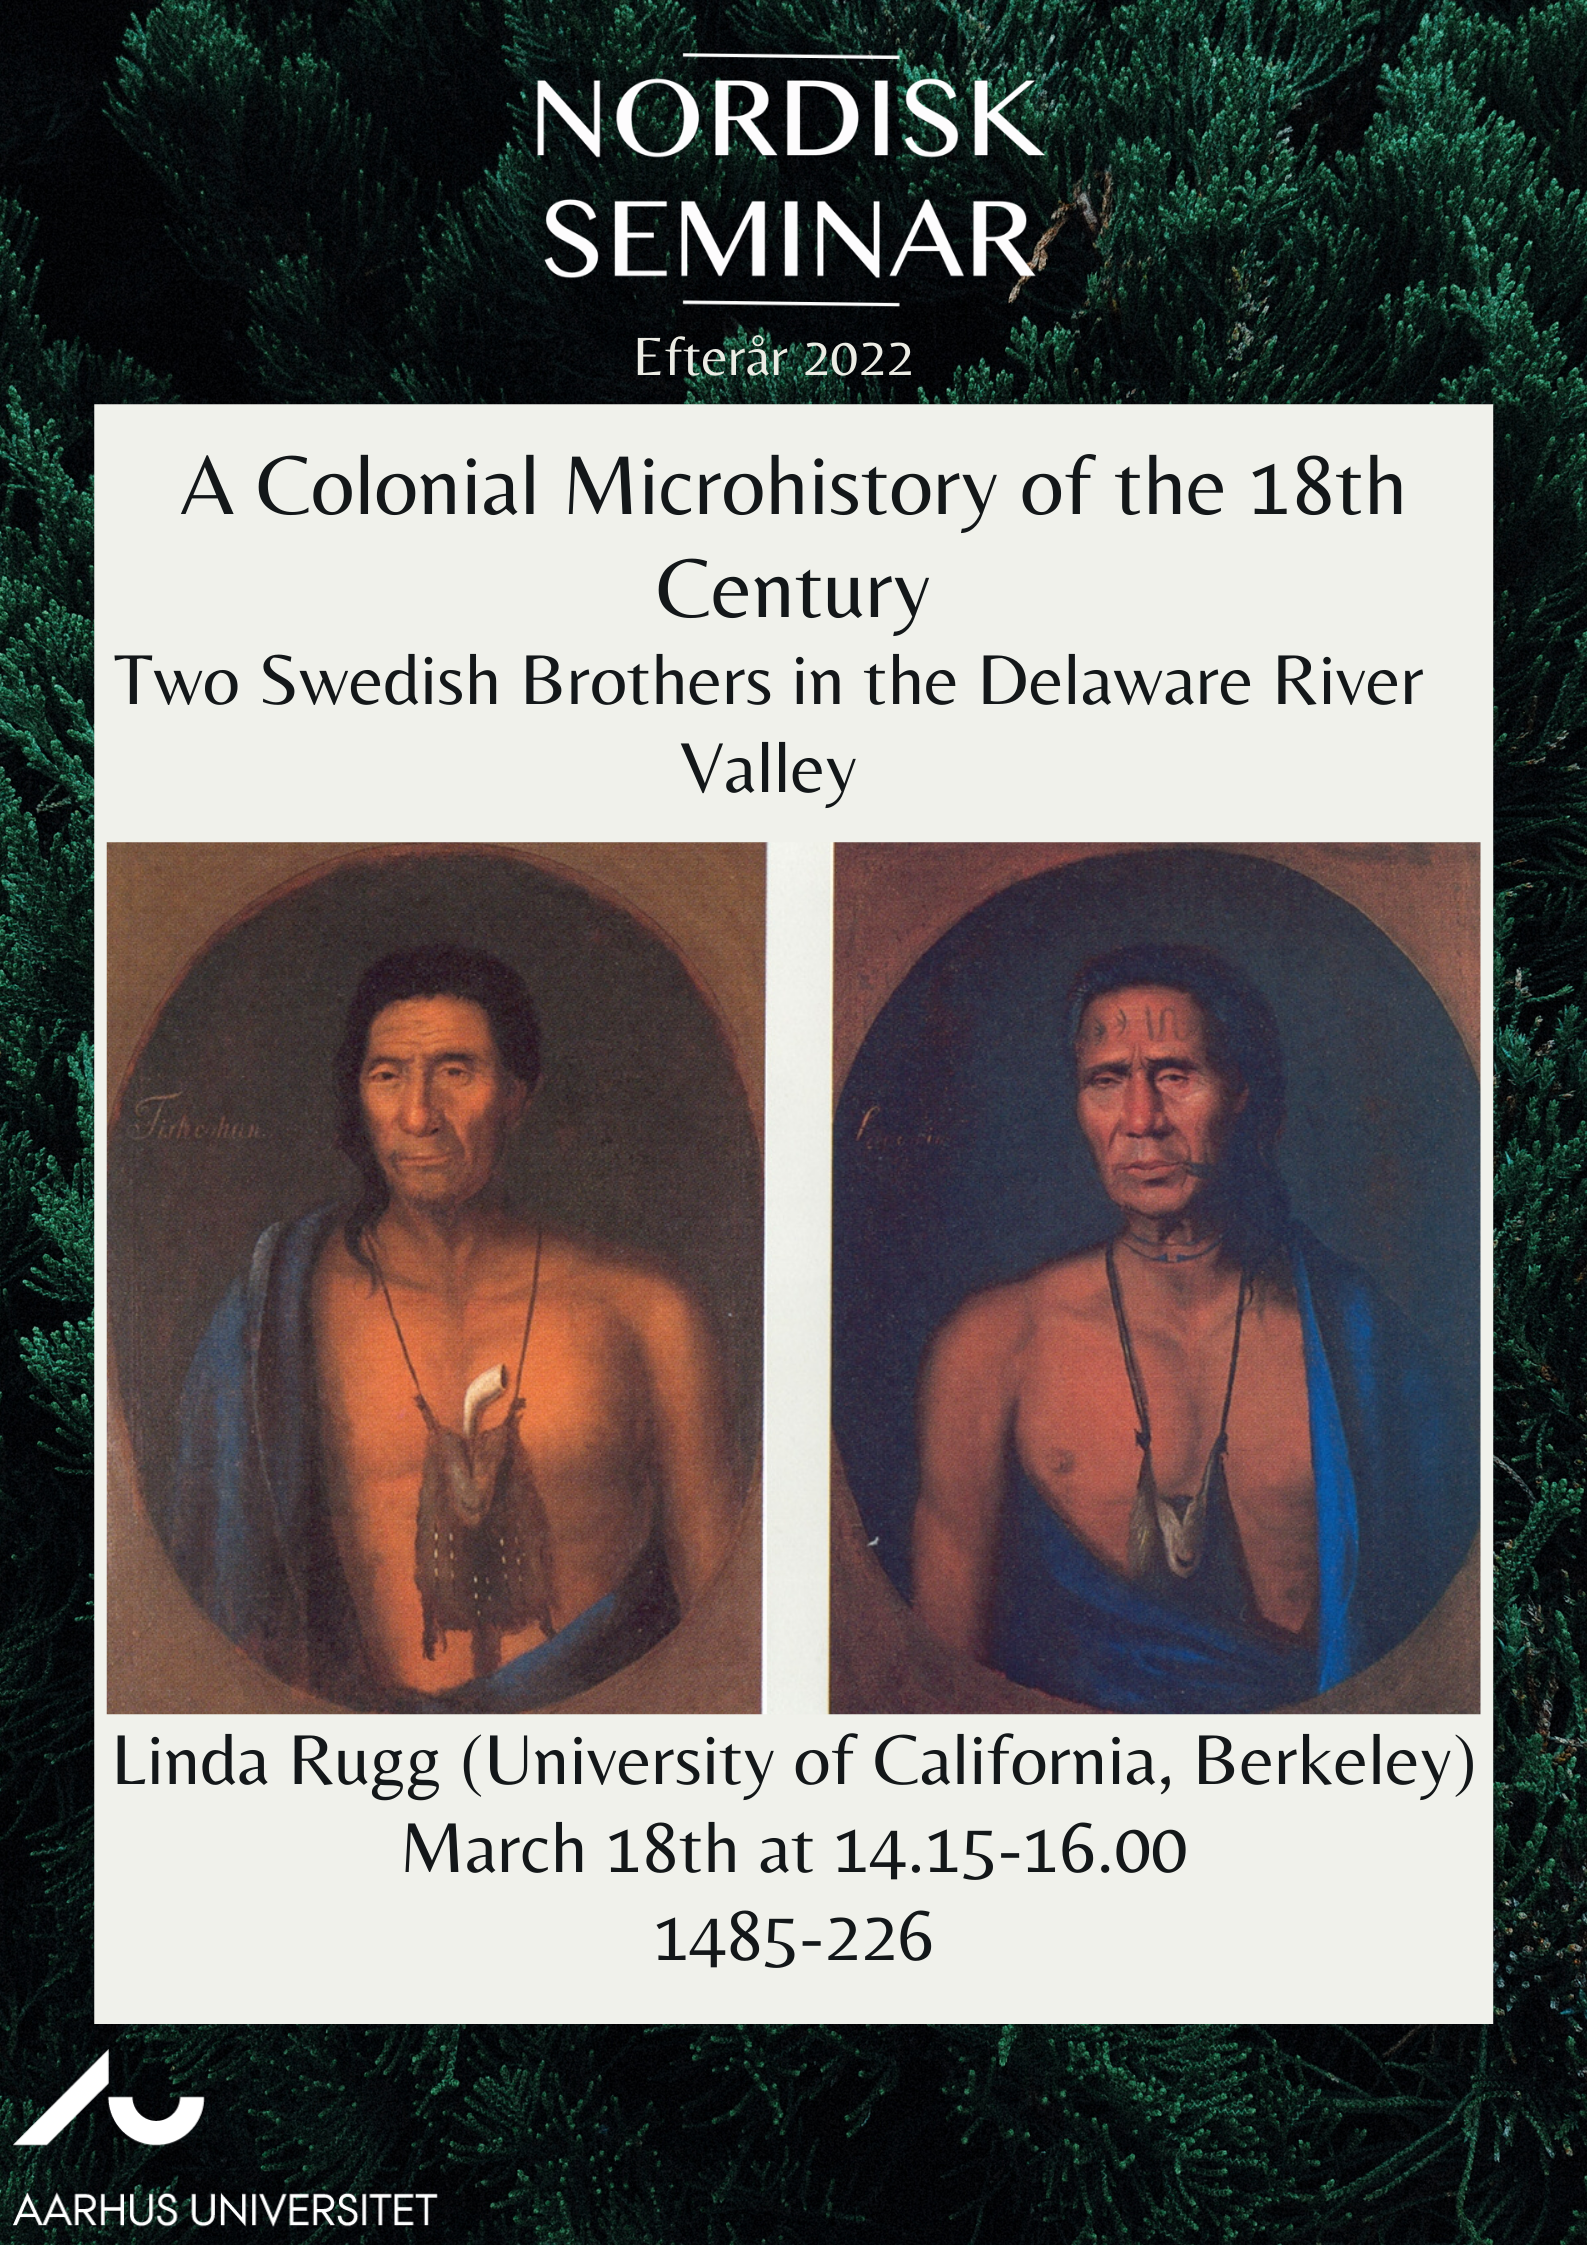 Nordisk Seminar: A Colonial Microhistory of the 18th Century. Two Swedish Brothers in the Delaware River Valley. Linda Rugg (University of California, Berkeley) March 18th at 14.15-16.00 1485-226.